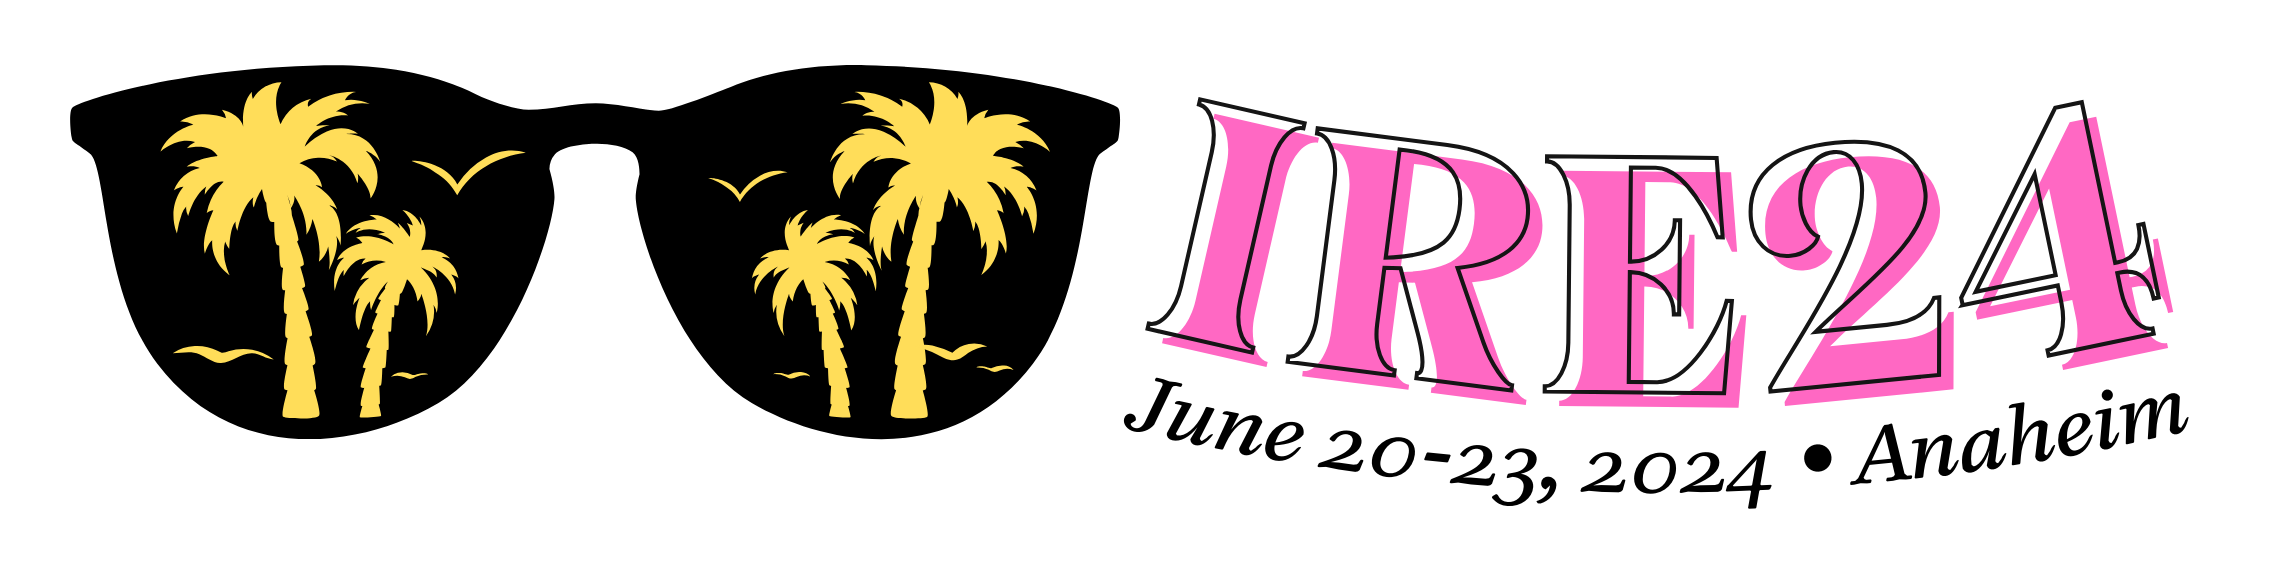 Main page for the IRE 2024 conference, June 20-23, 2024 | Anaheim